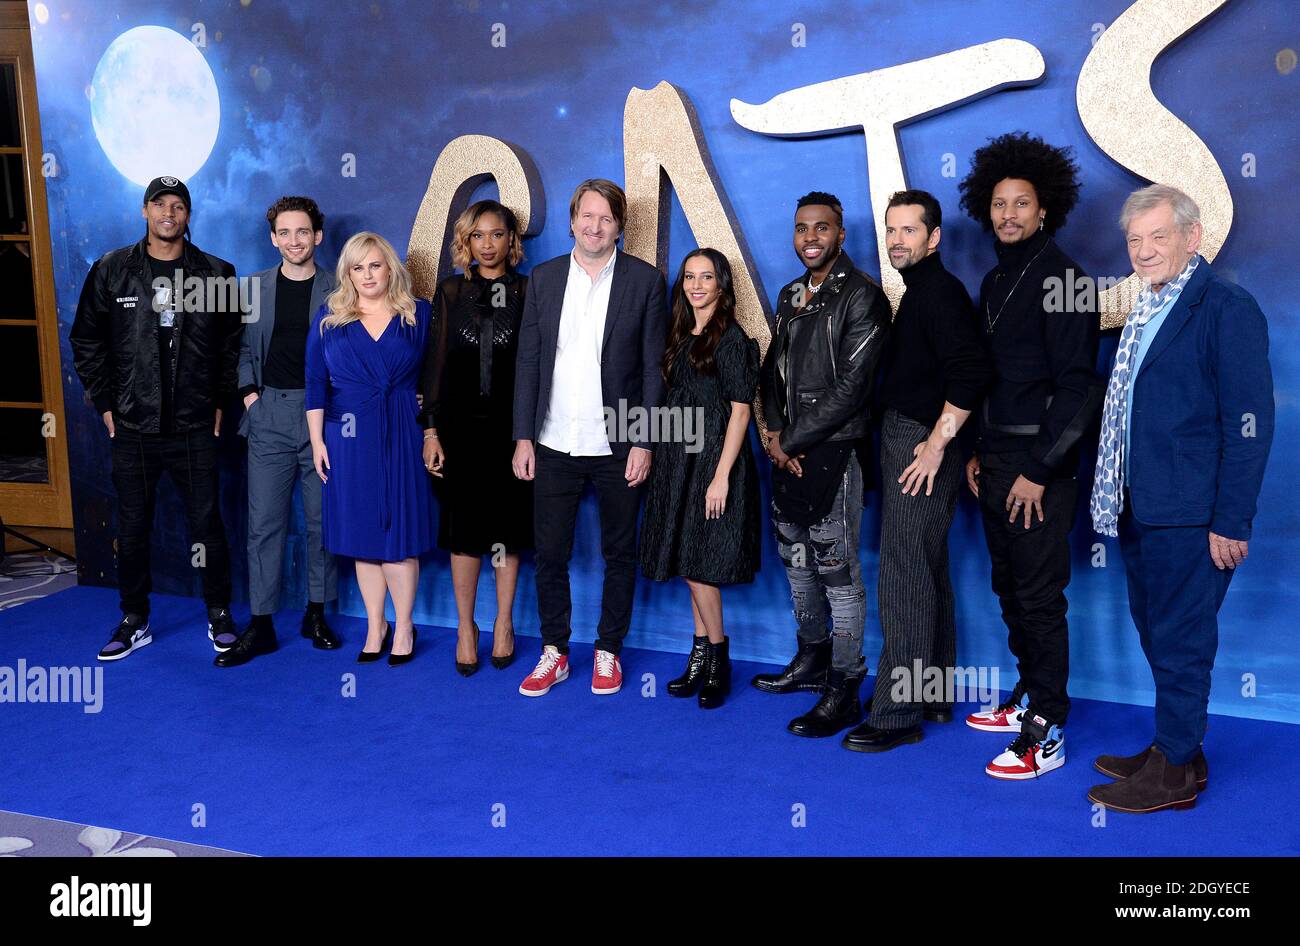 Larry Bourgeois (left to right), Laurie Davidson, Rebel Wilson, Jennifer Hudson, Tom Hooper, Francesca Hayward, Jason Derulo, Robbie Fairchild, Laurent Bourgeois and Sir Ian McKellen attending the Cats photocall at The Corinthia Hotel, London Stock Photo